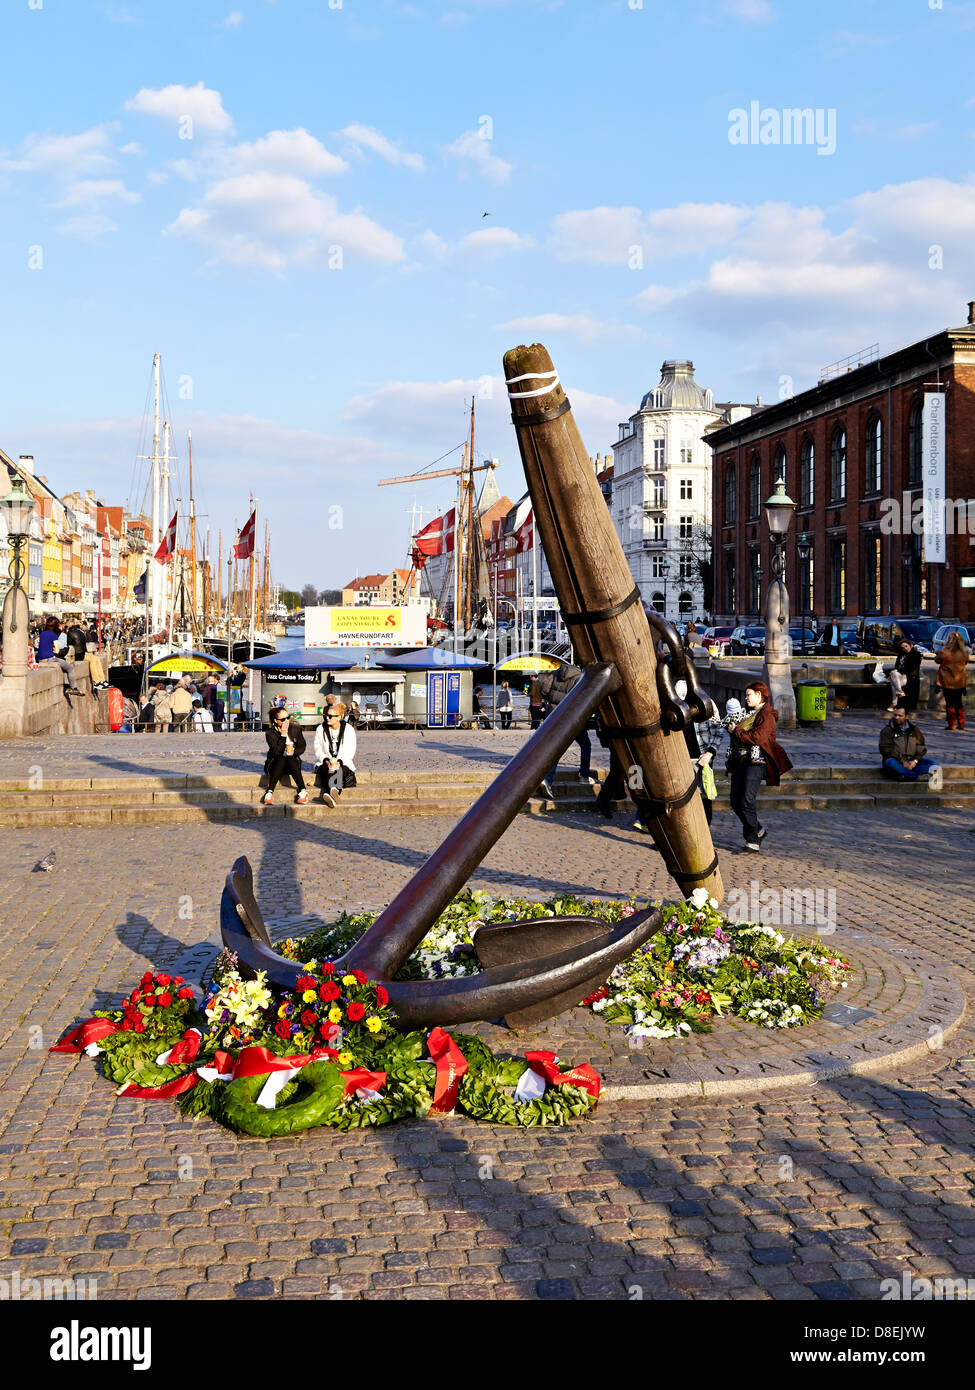 The "anchor monument" (Mindeankeret) is Nyhavn, at the corner of Kongens Nytorv. It commemorates the 1600 Danish sailors killed the Second World War. year the 5th May, the